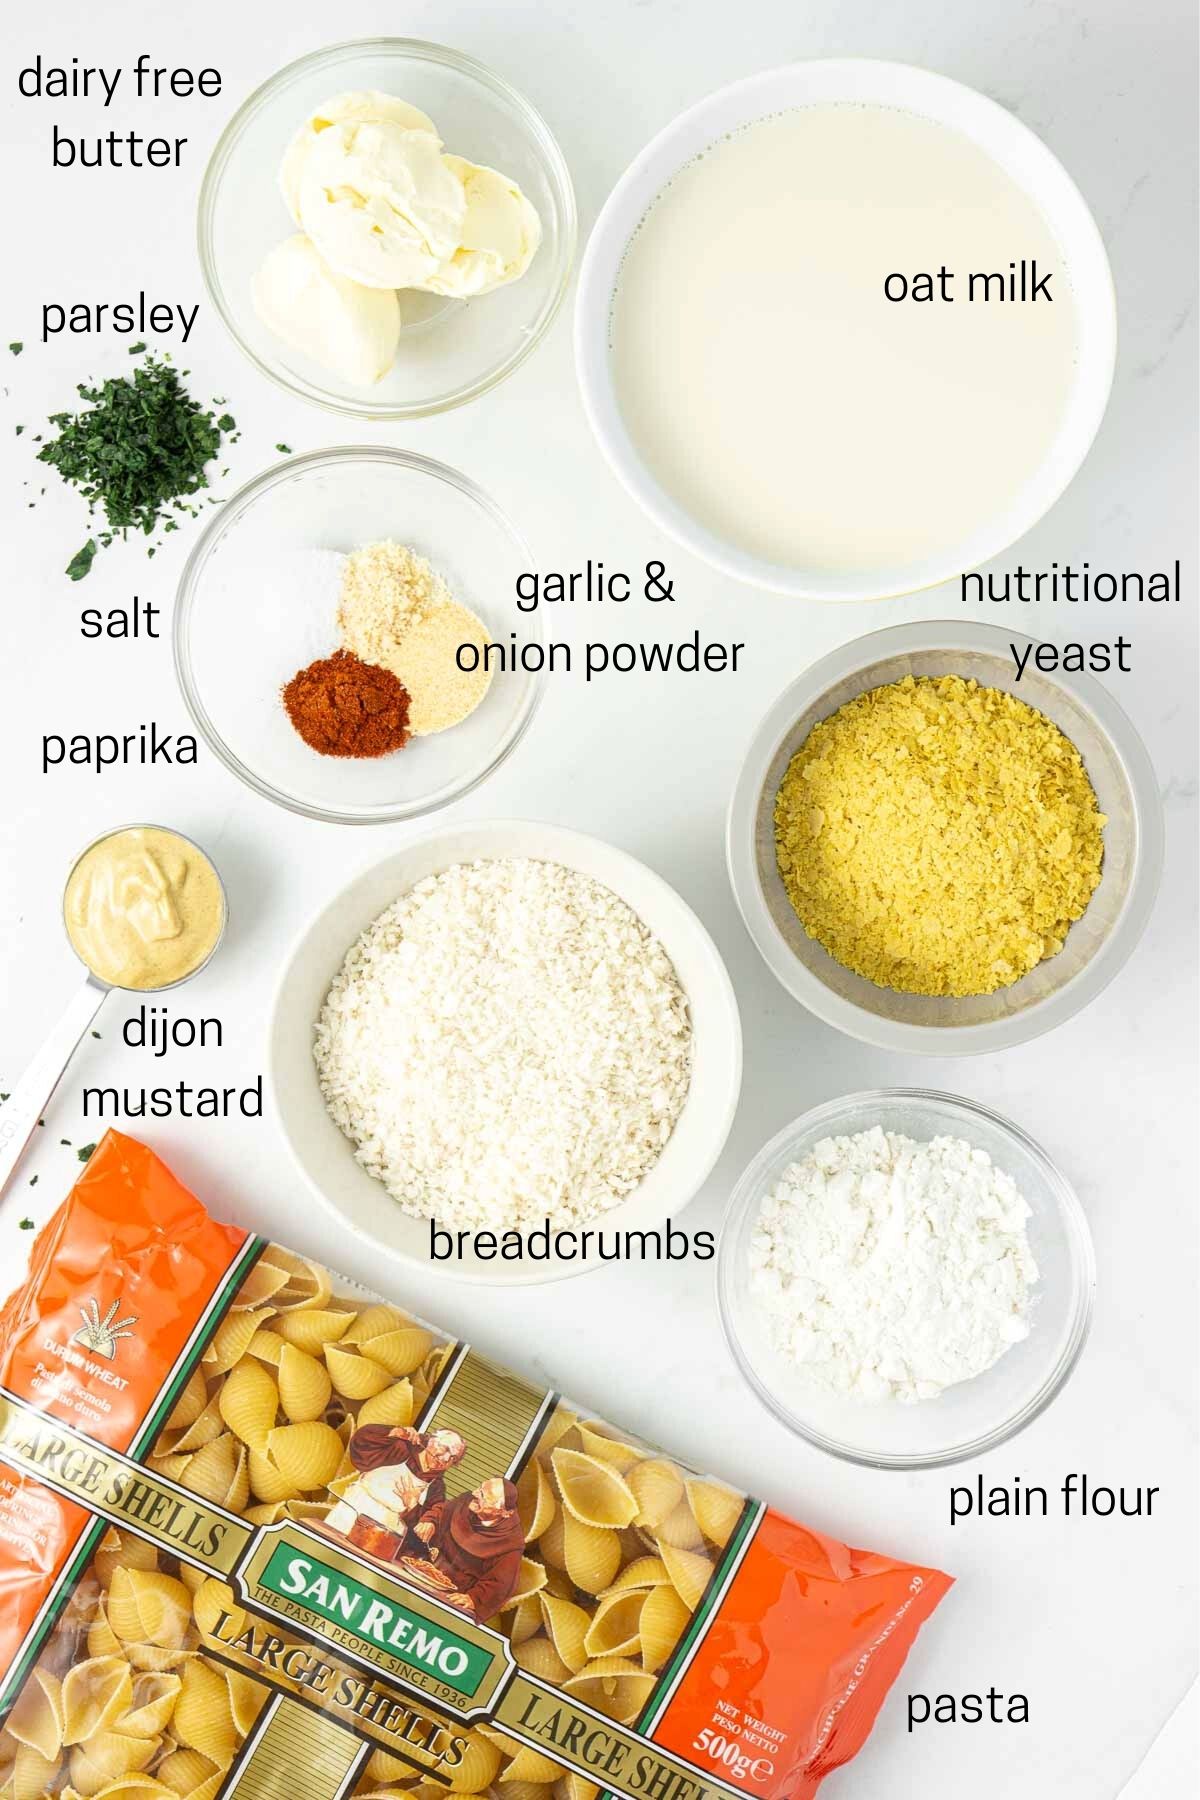 All ingredients for dairy-free mac and cheese laid out in small bowls.